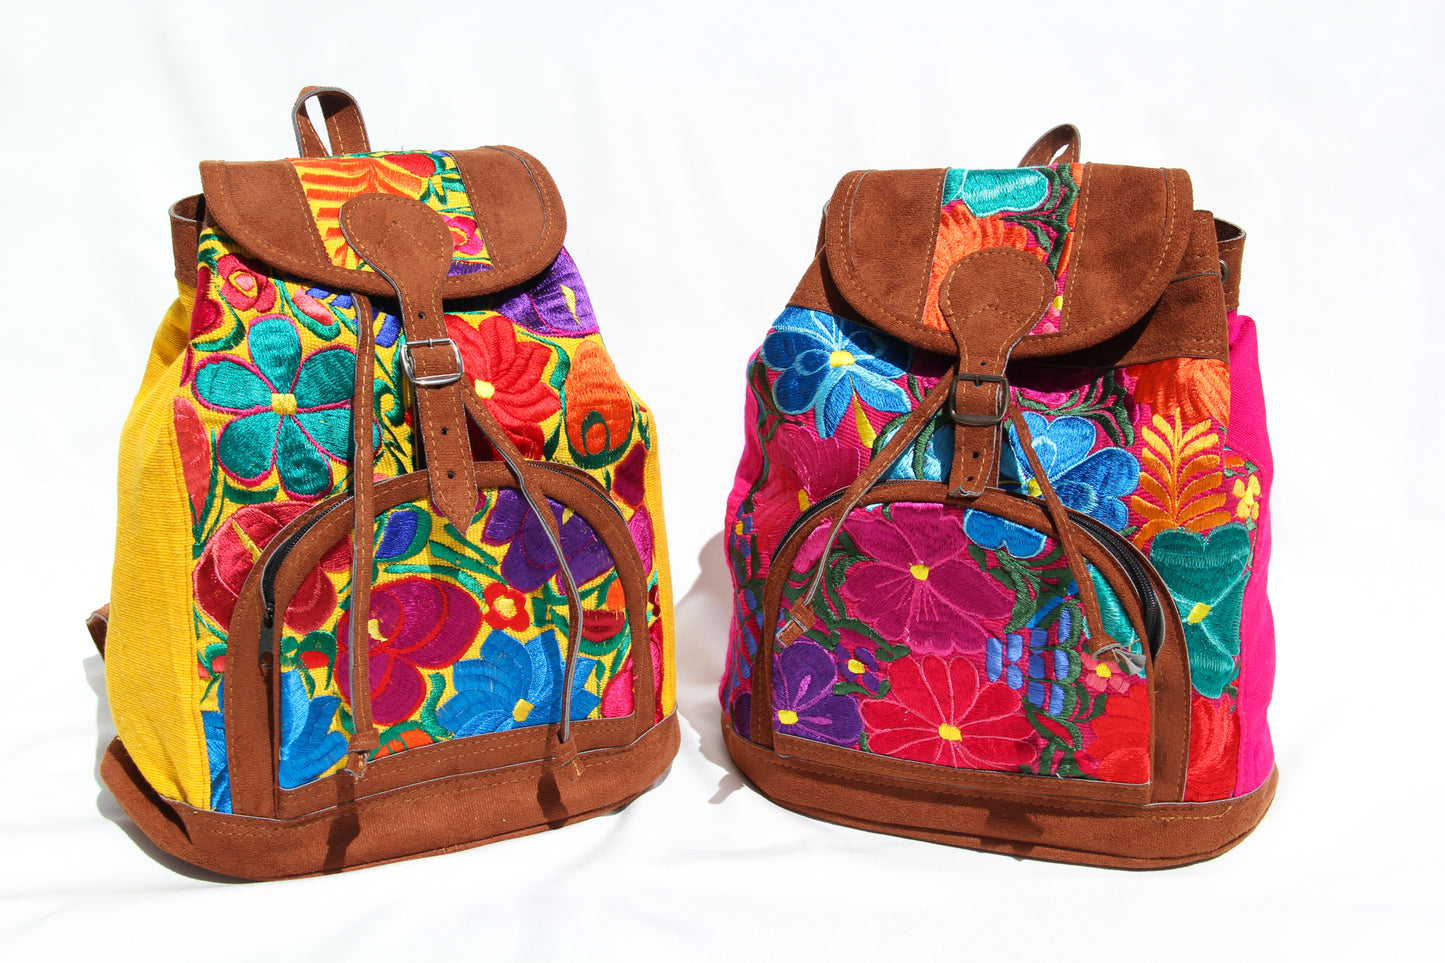 Two colorful huipil floral embroidery backpacks in yellow and pink woven fabric and faux suede contrast with adjustable straps and front buckle closure with front zipper pocket the prefect travel, hiking or beach bag unique bag great for back to school take this bag on your next destination boho bag and hippie style bag a great standout accessories made in Guatemala